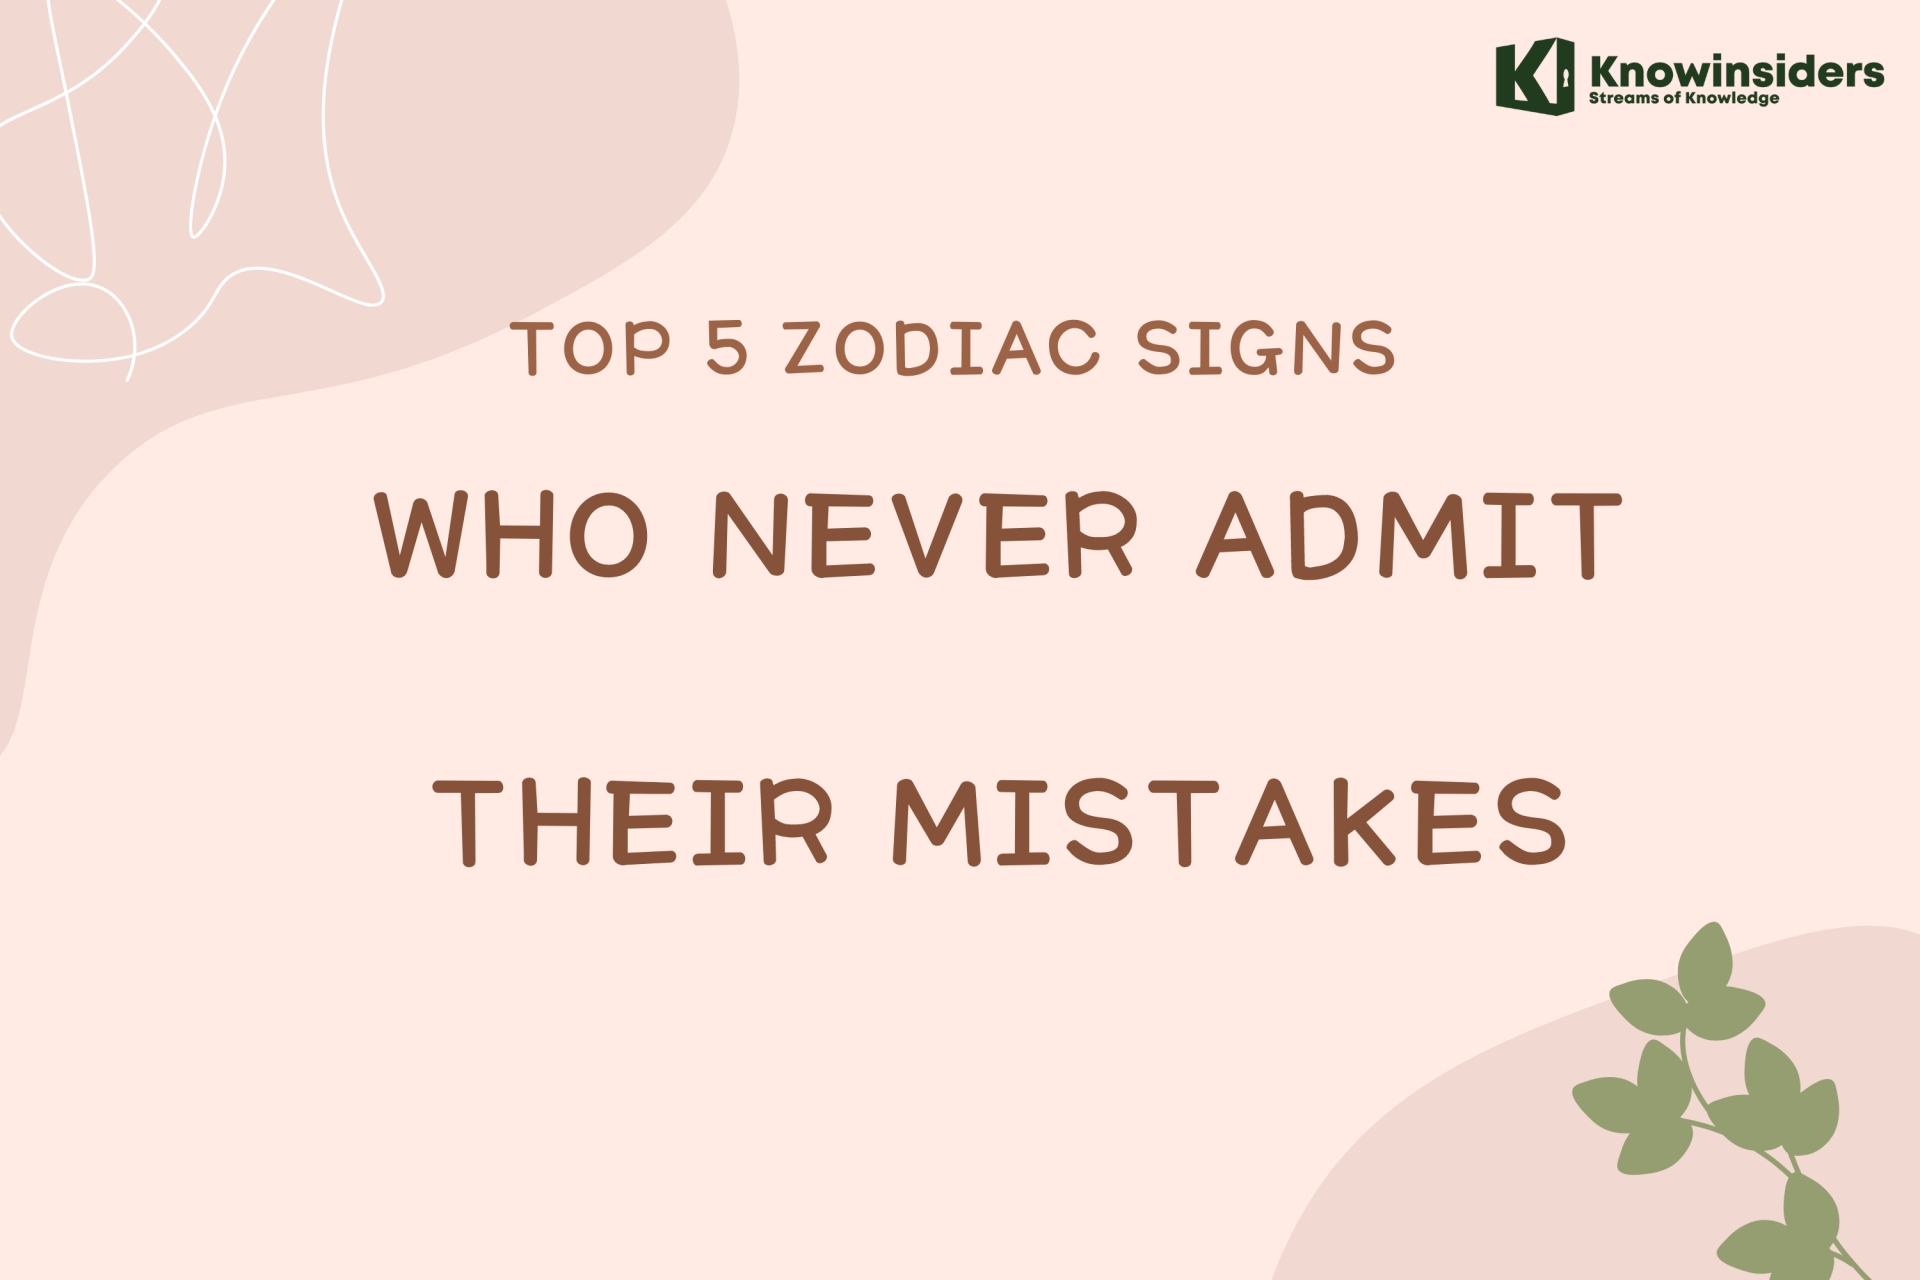 Top 5 zodiac signs that never admit their mistakes